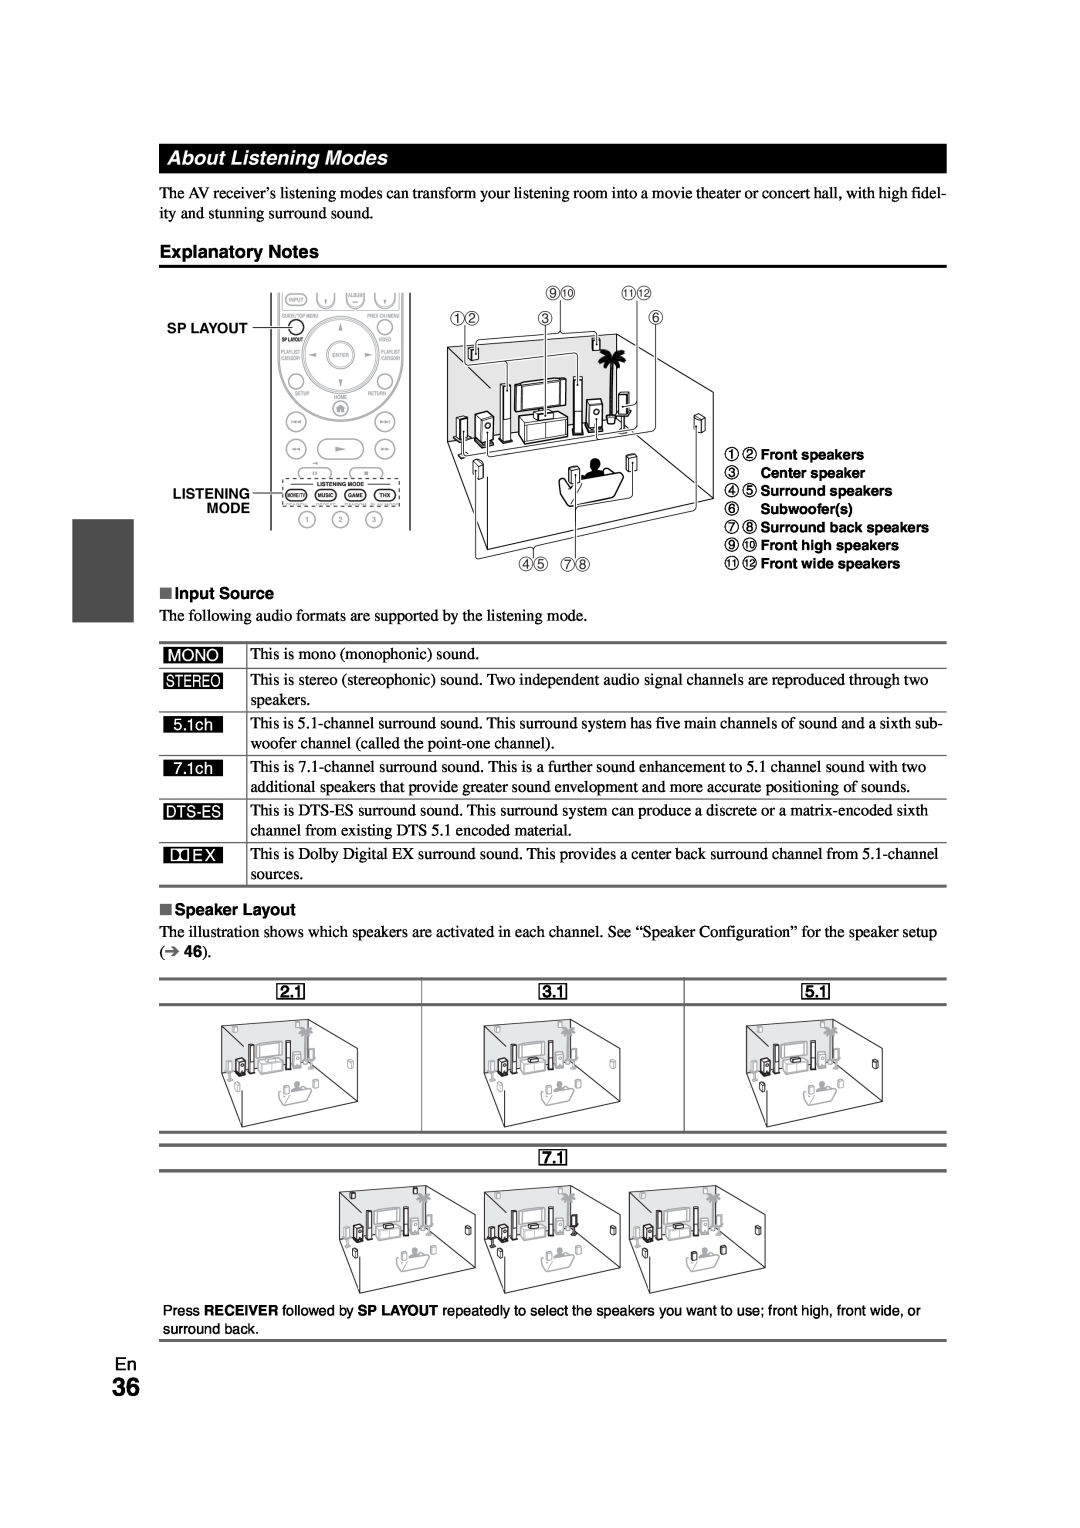 Onkyo TX-NR808 instruction manual About Listening Modes, Explanatory Notes, Input Source, Speaker Layout 